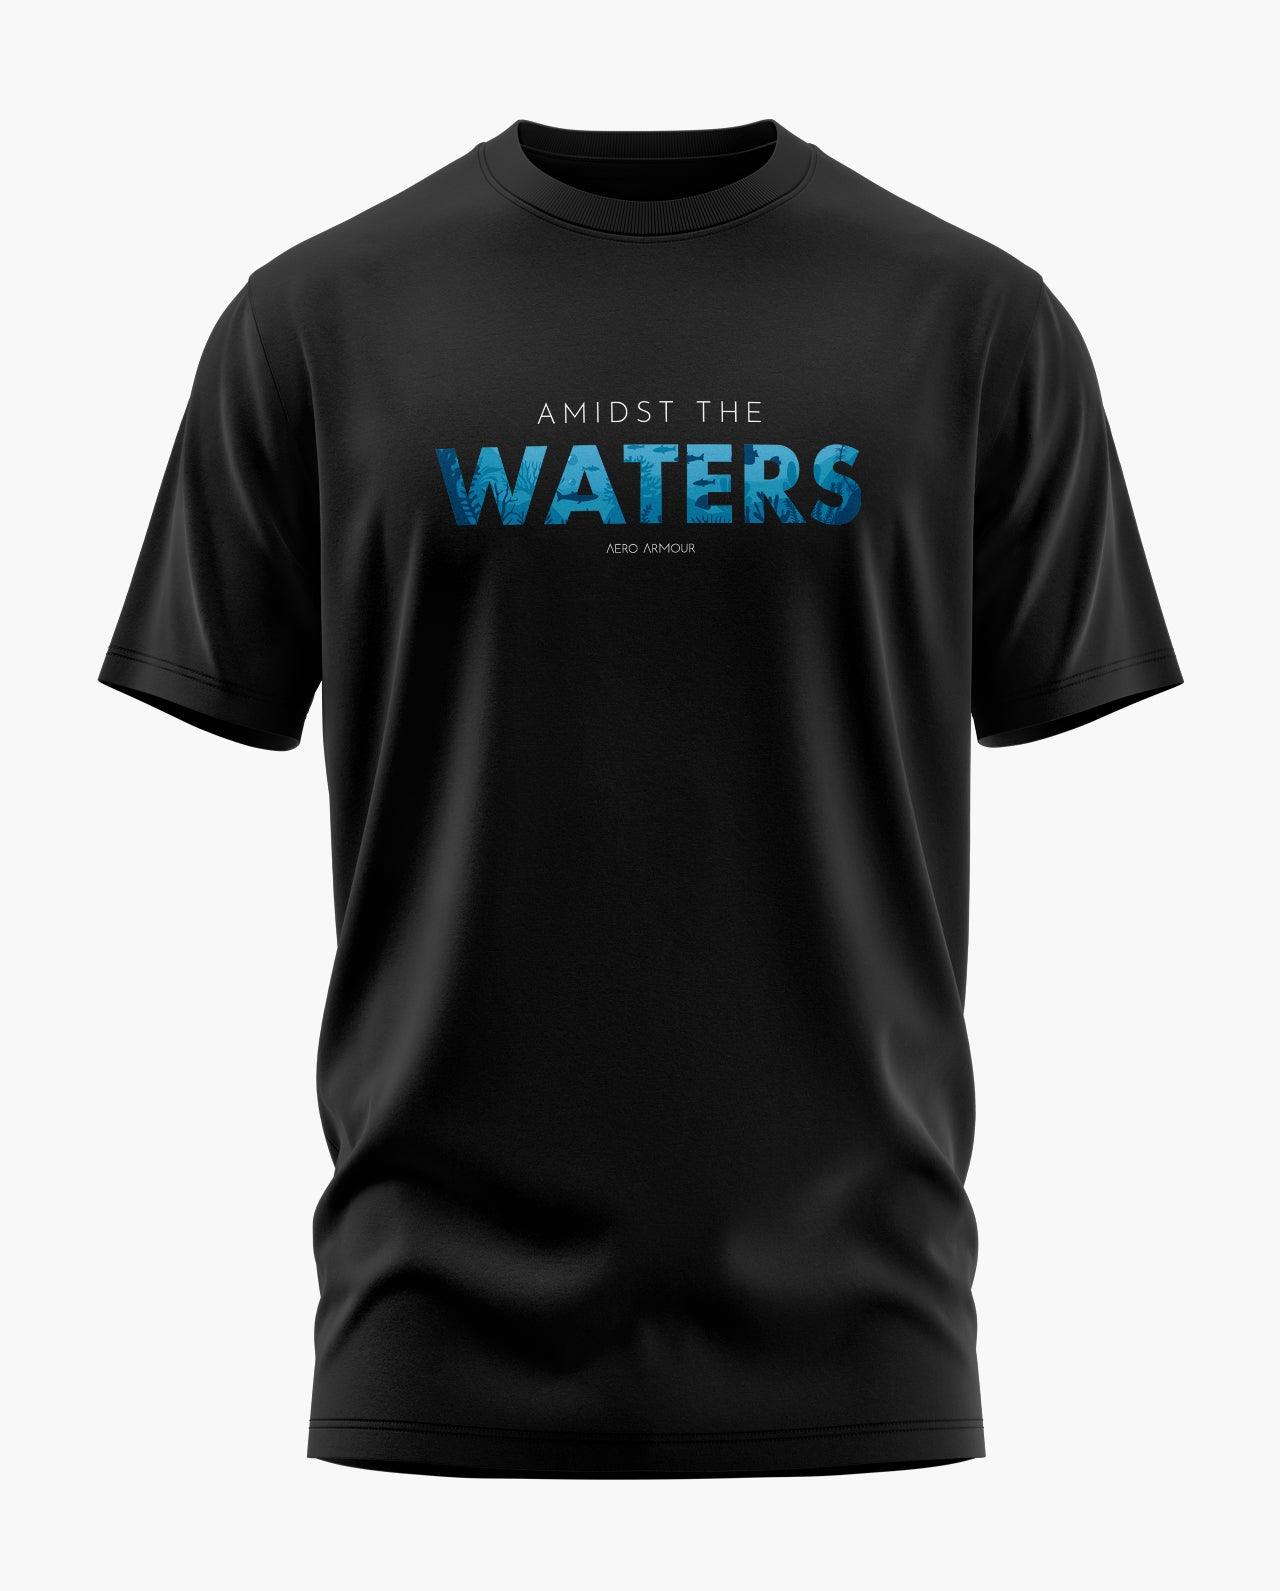 Amidst The Water T-Shirt - Aero Armour